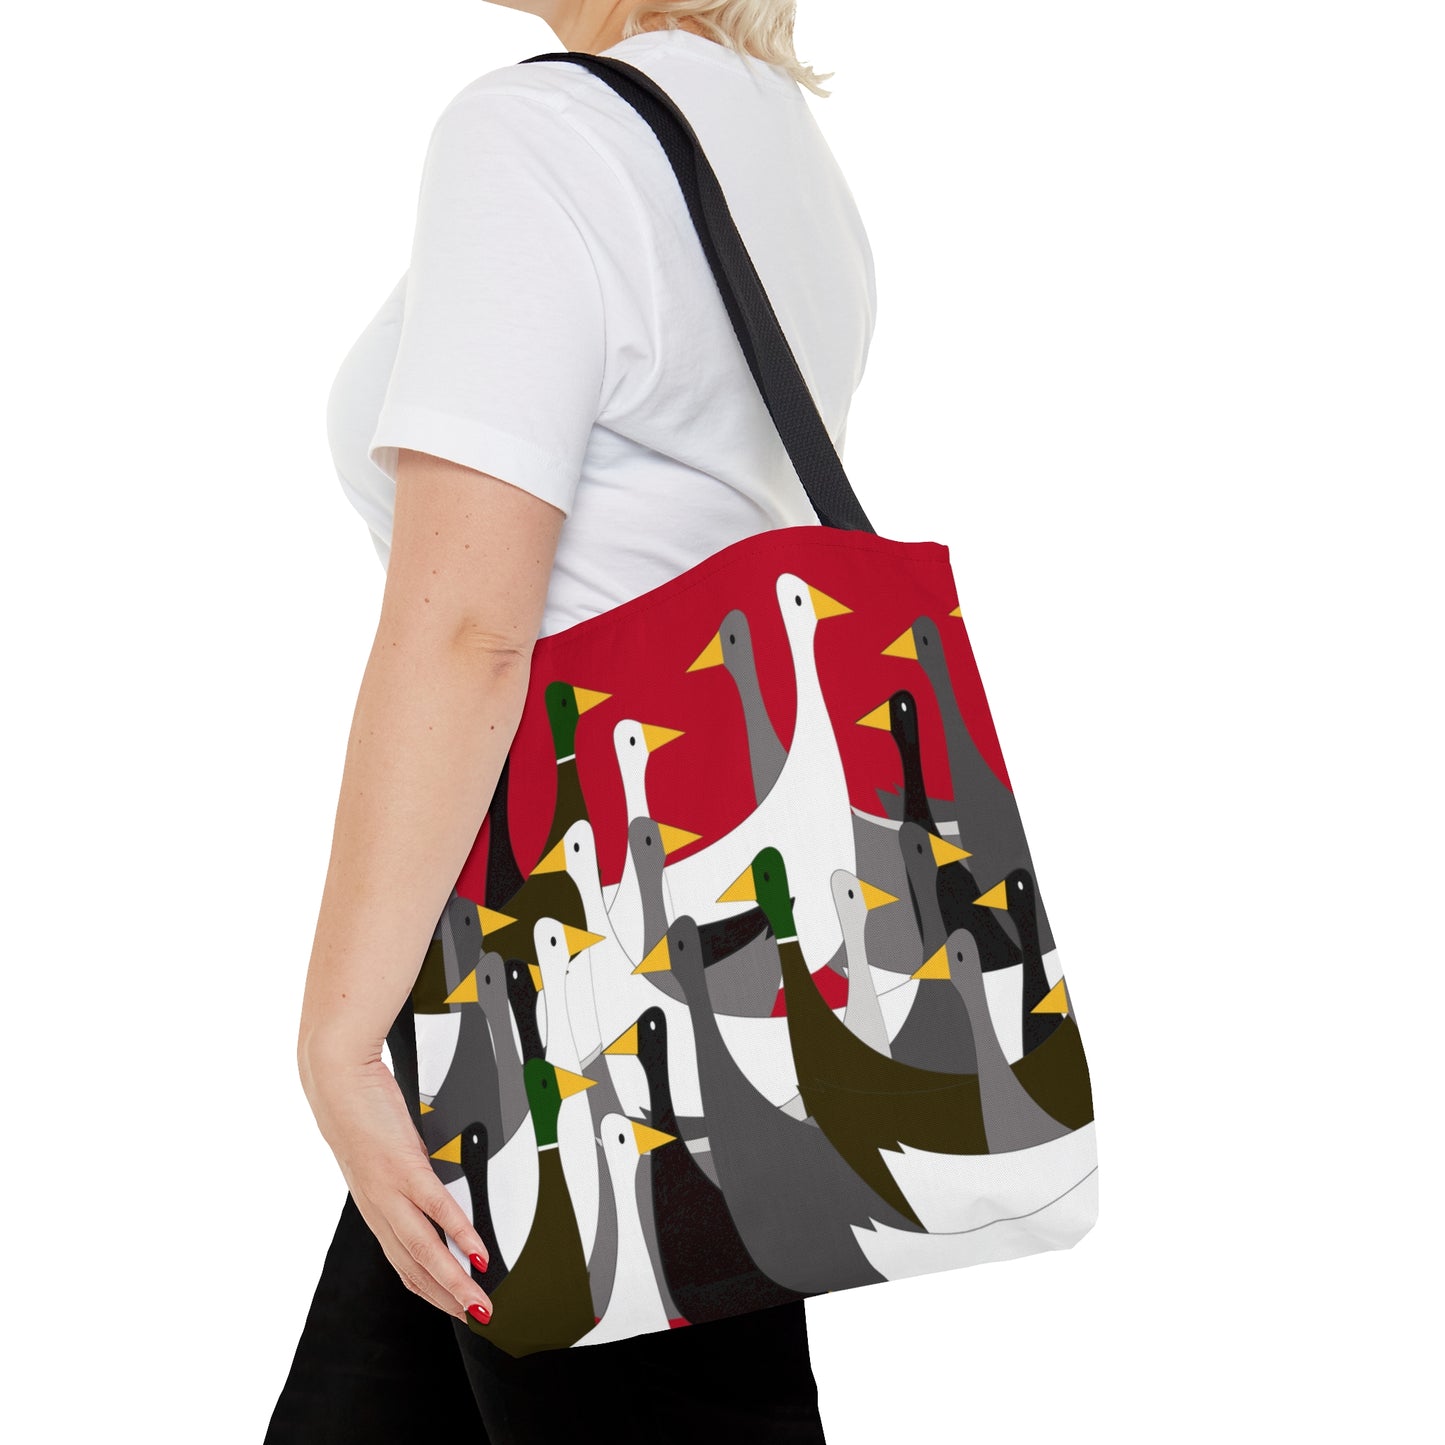 Not as many ducks - Fire Engine Red c8092e - Tote Bag